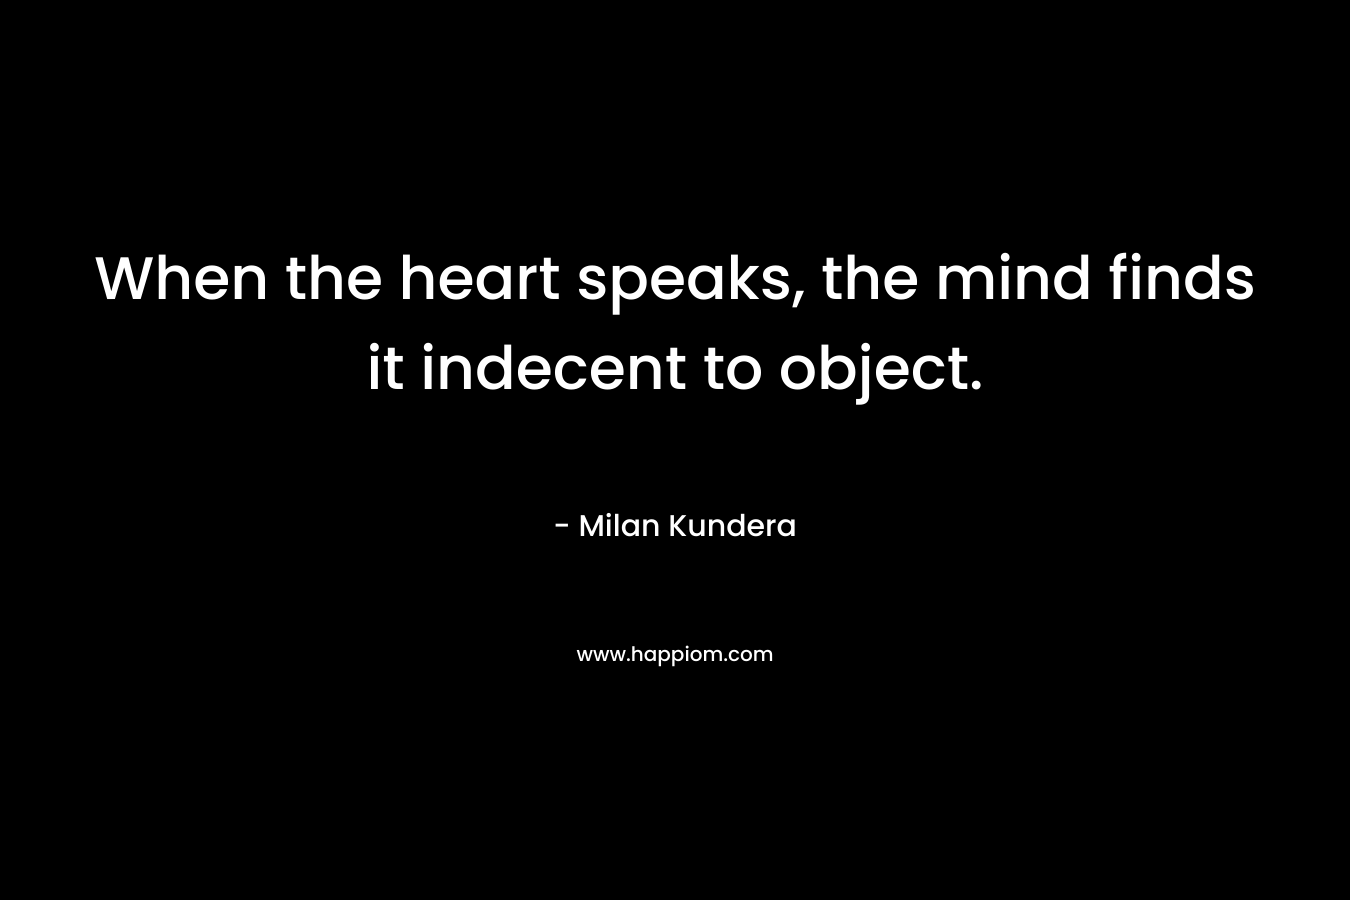 When the heart speaks, the mind finds it indecent to object.